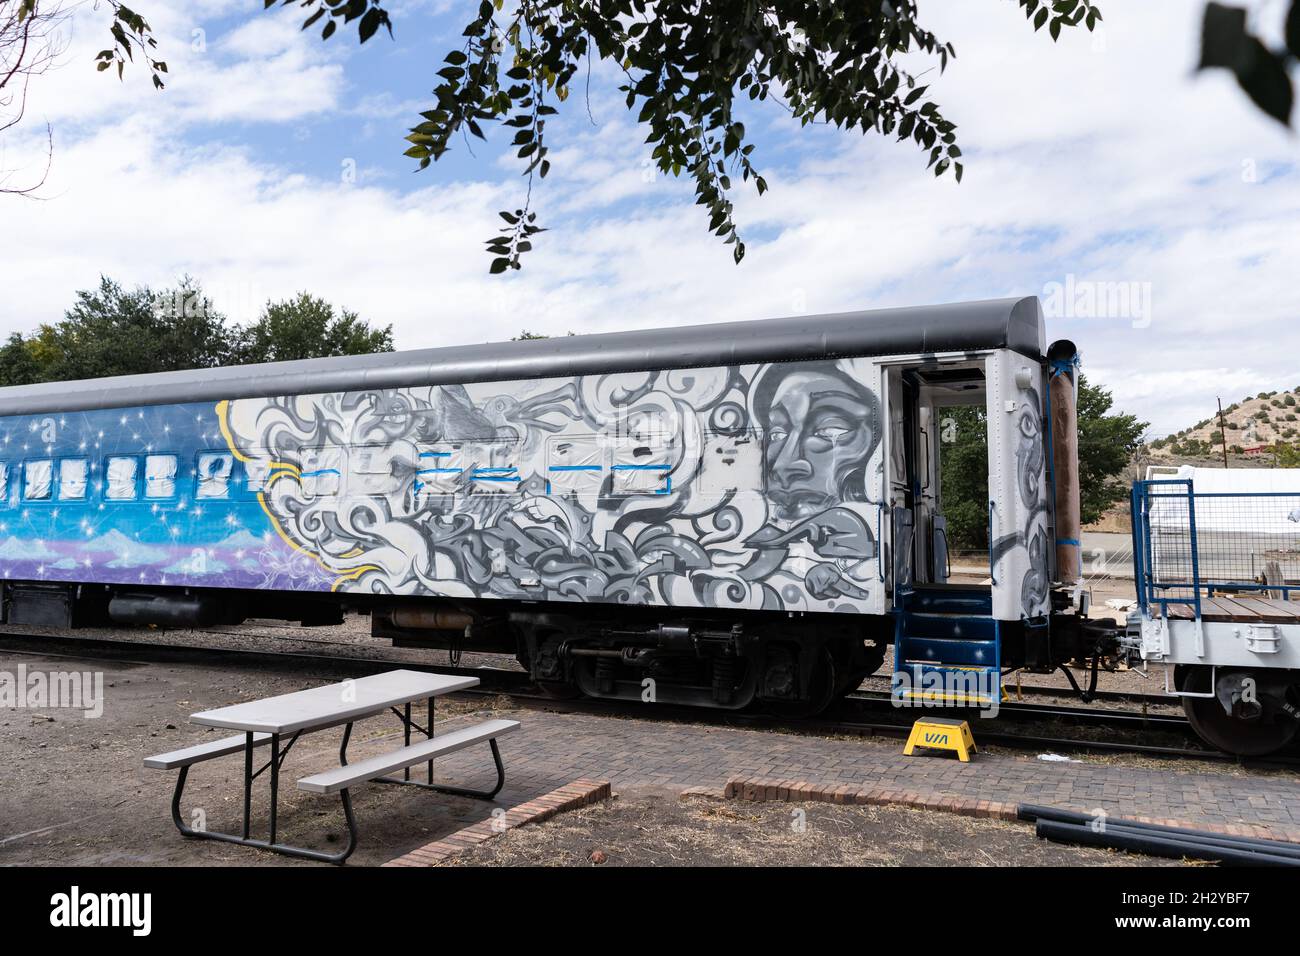 A passenger train car painted top-to-bottom with art sits at the Lamy Amtrak station in Lamy, New Mexico, just south of Santa Fe. The A Song of Fire a Stock Photo